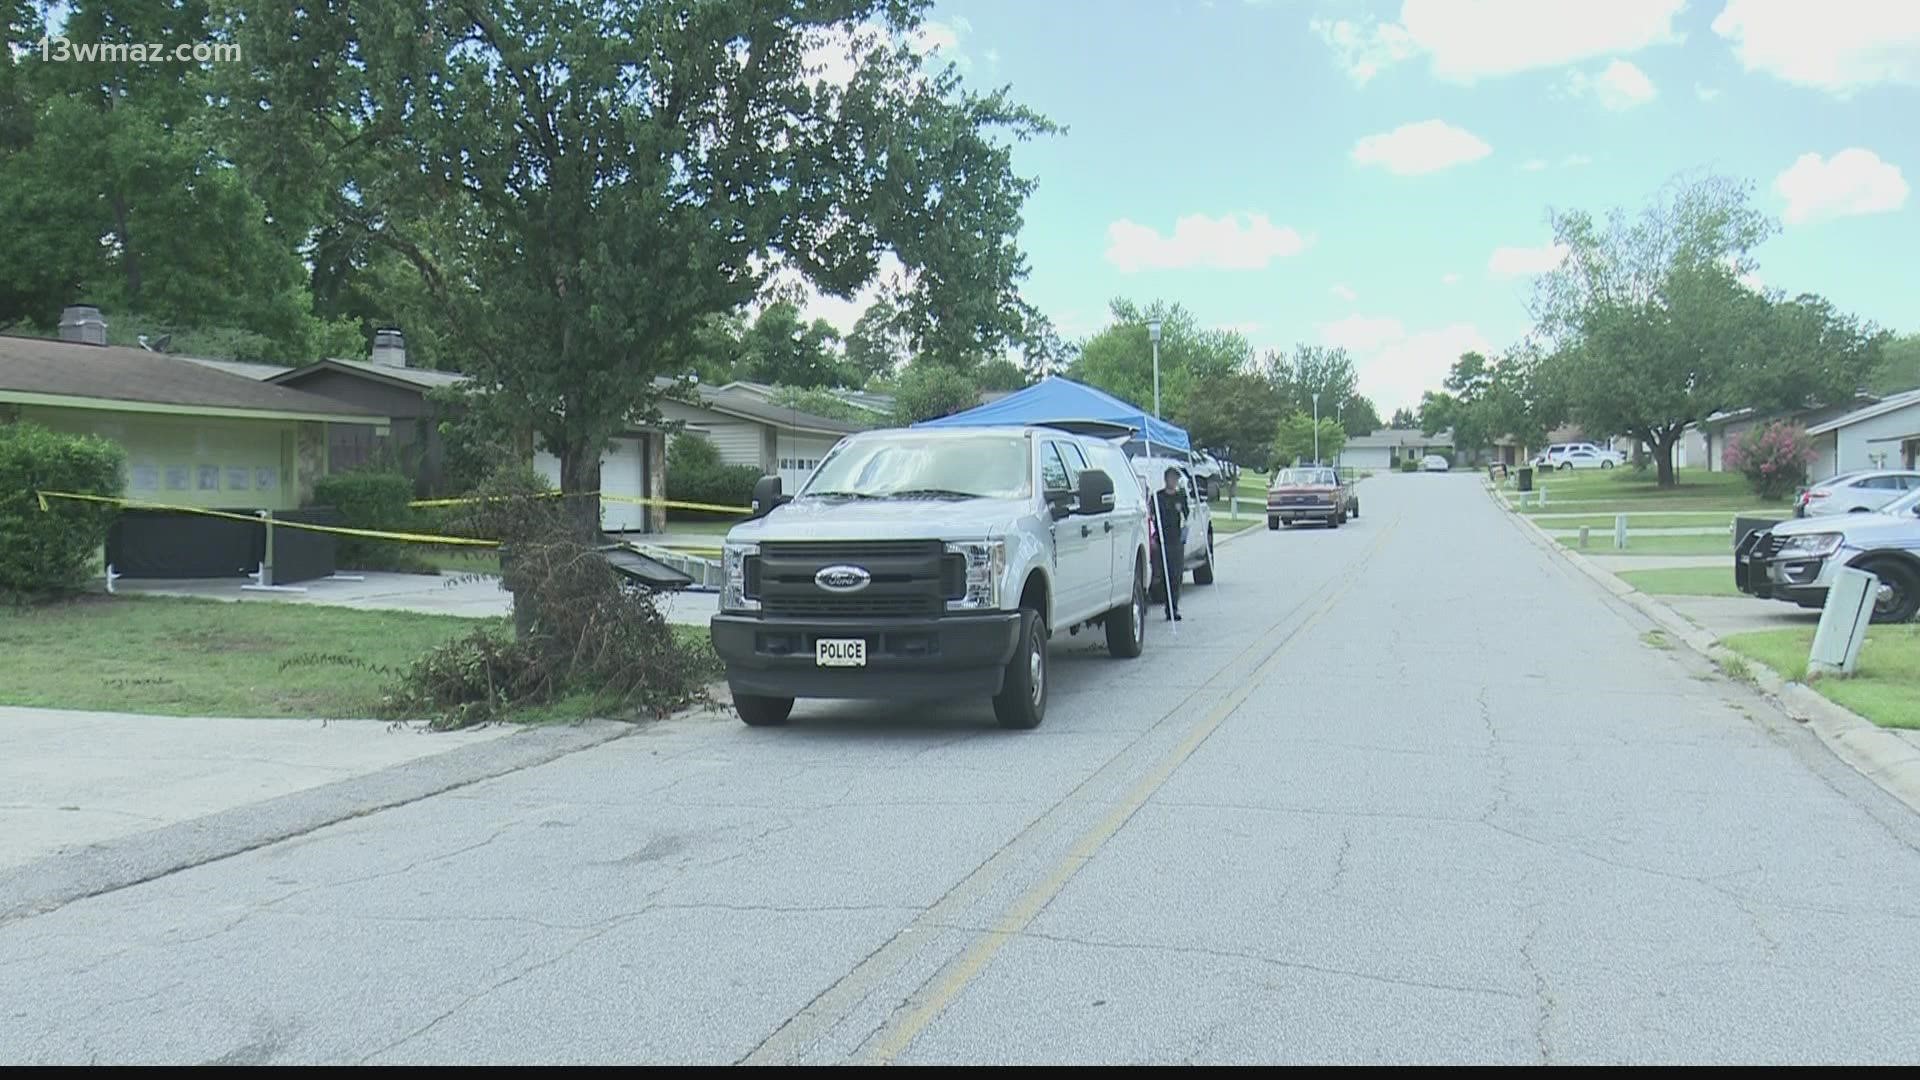 The Warner Robins Police Department is treating the suspicious death as a homicide.